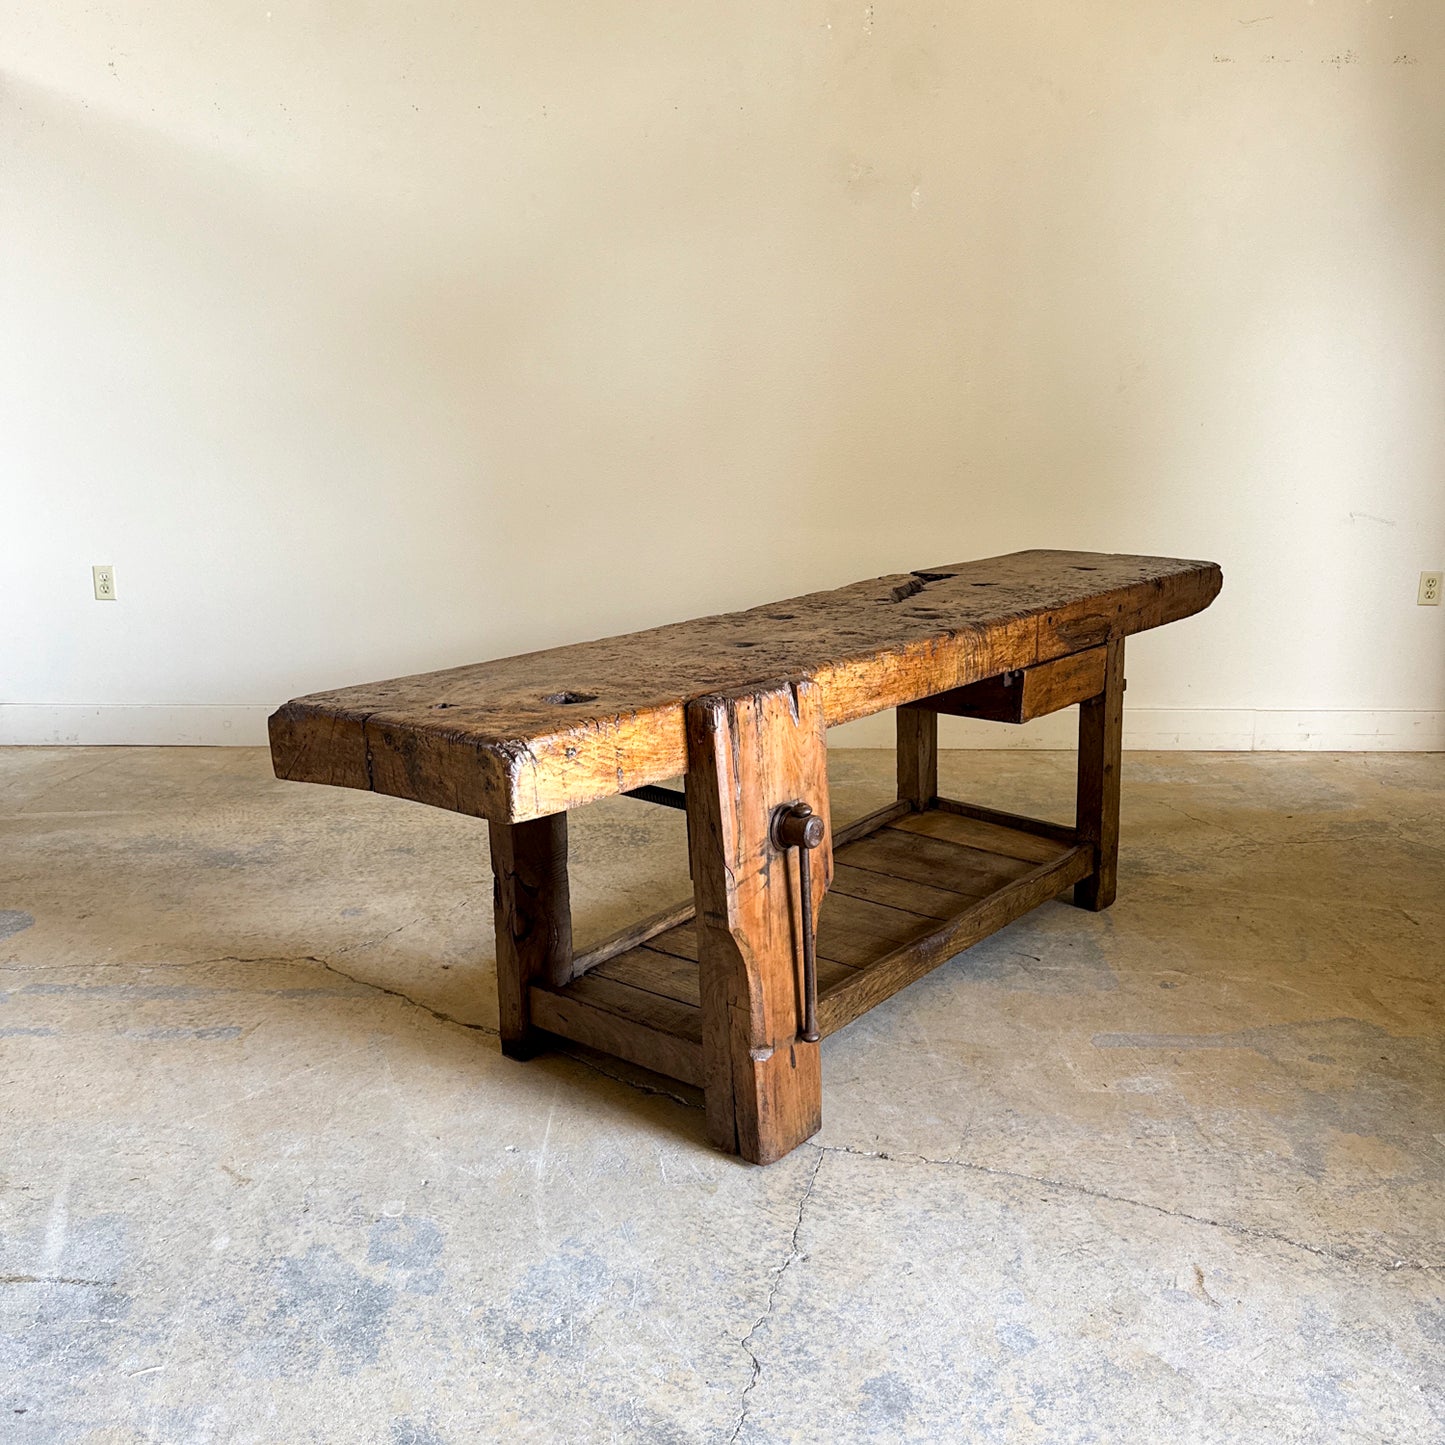 Antique Rustic Work Bench with One Drawer and Original Hardware